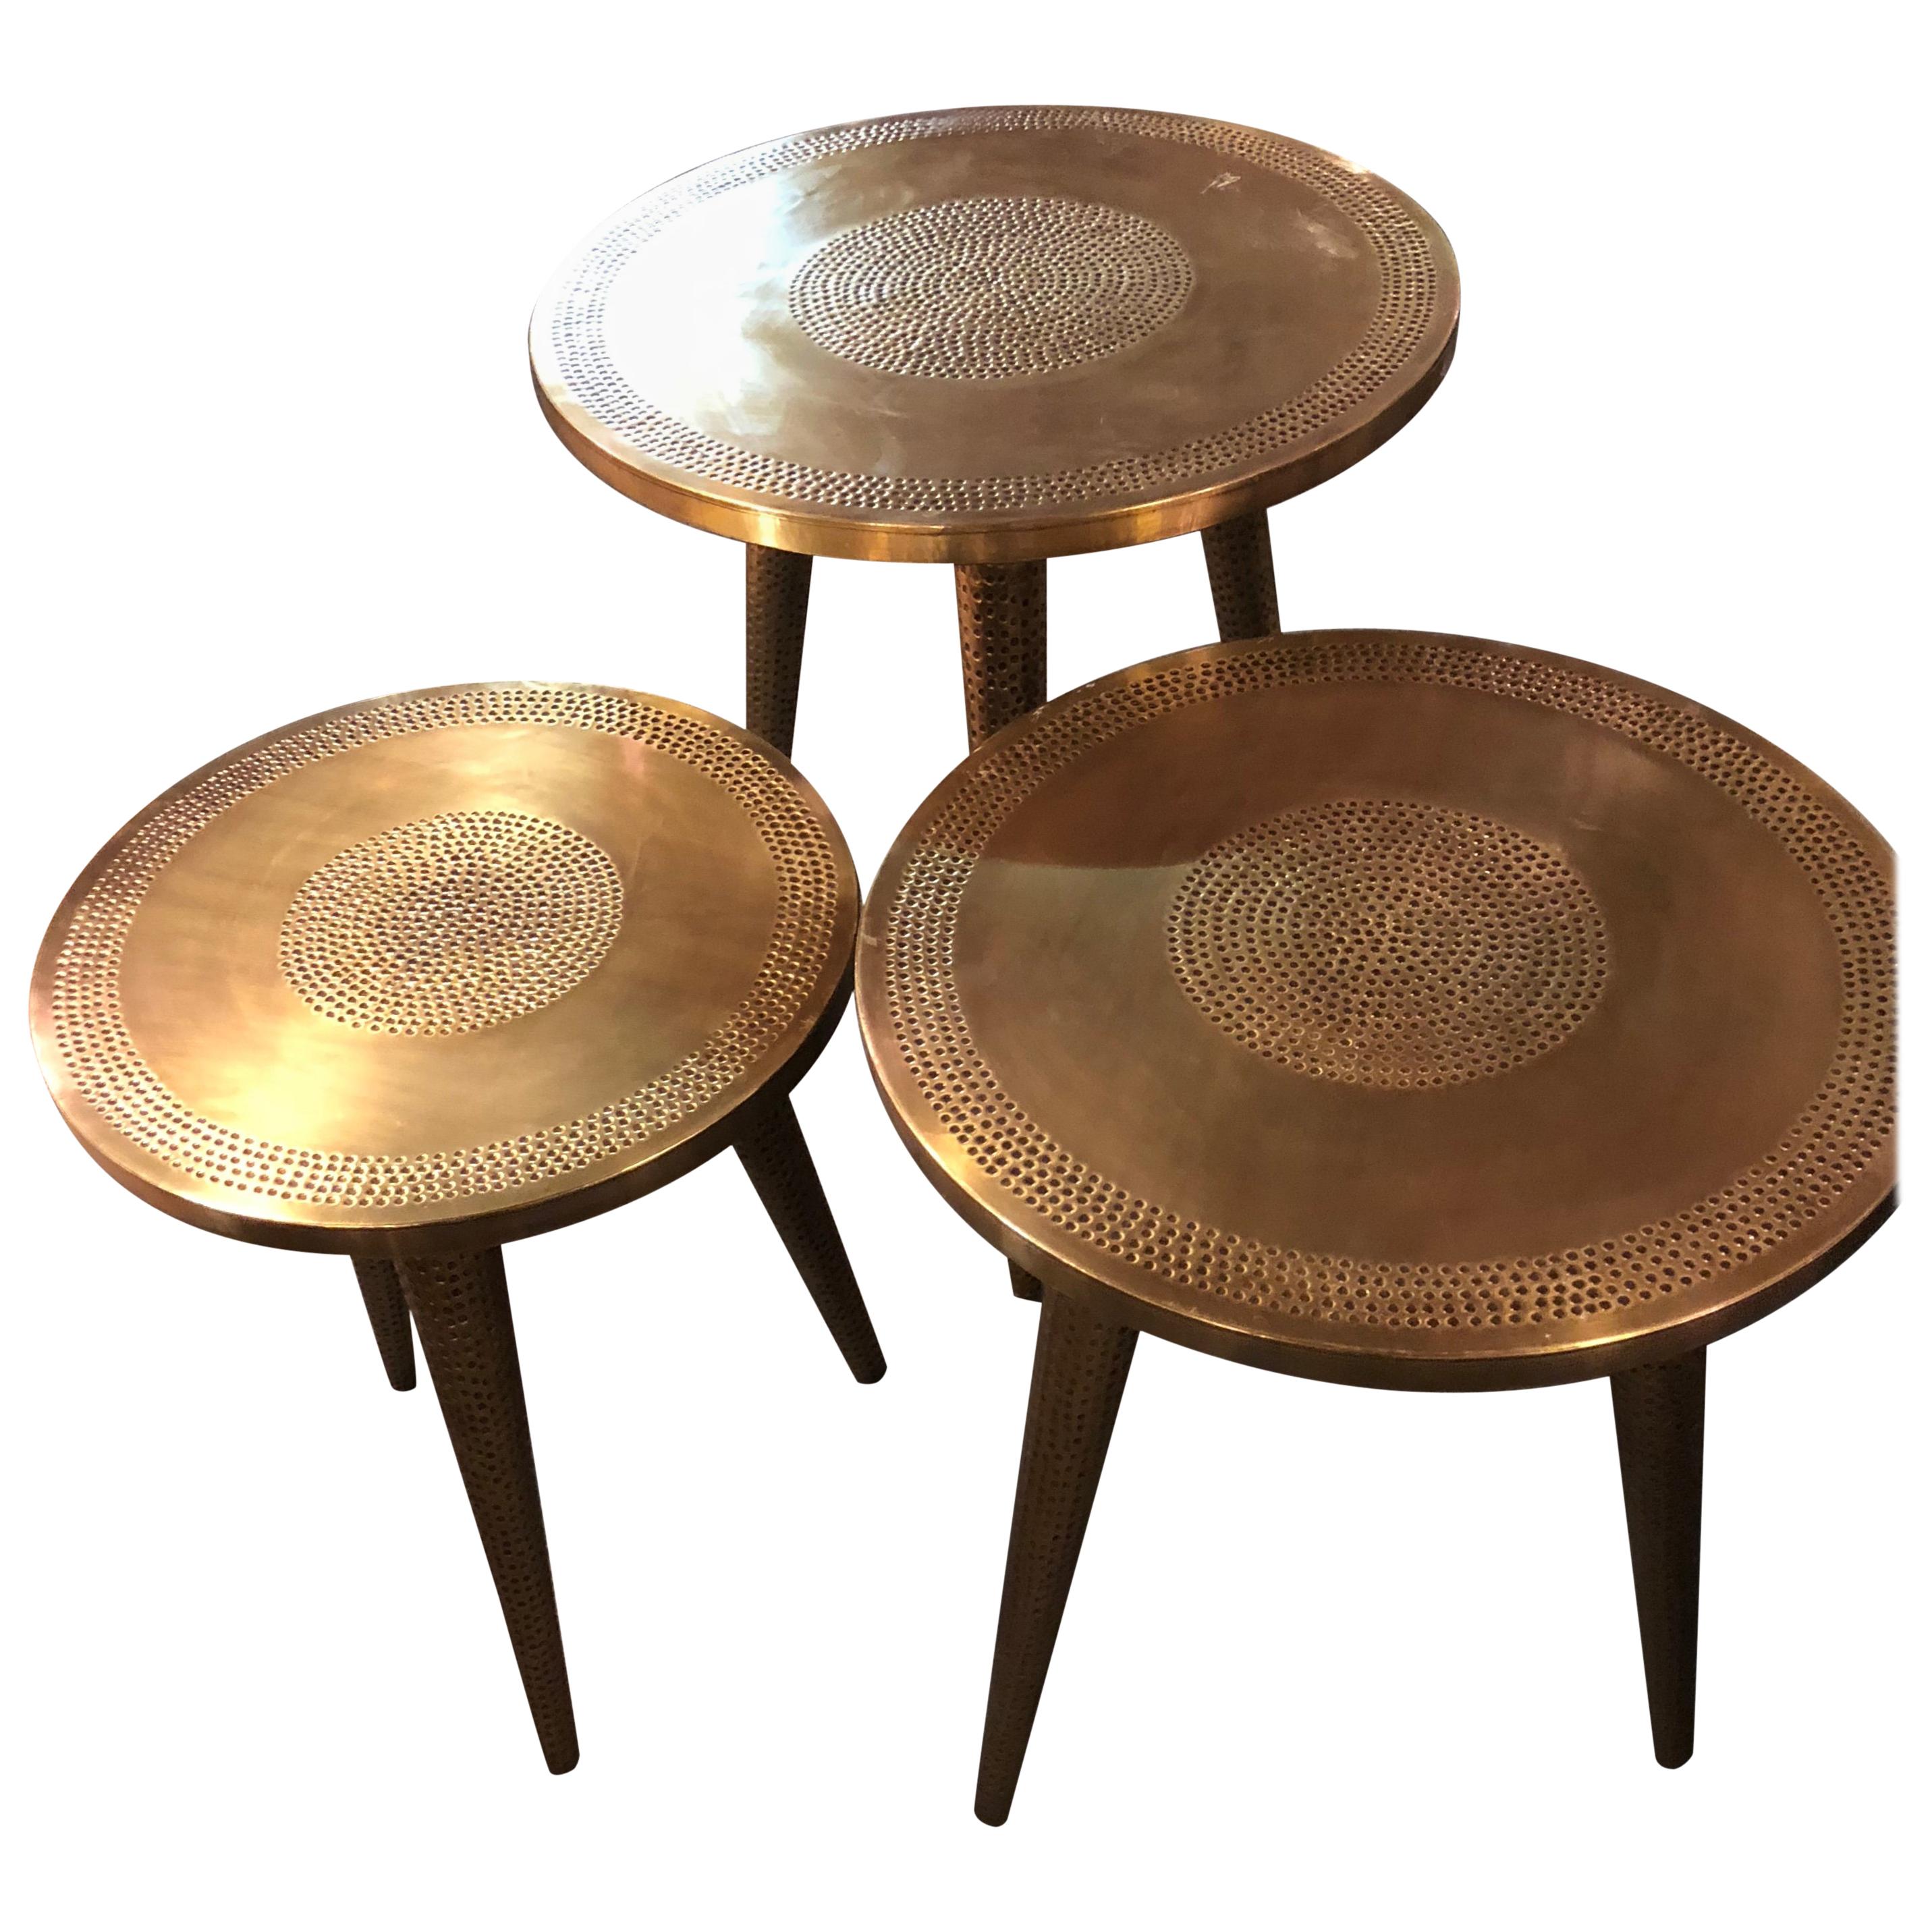 Nest of Three Mid-Century Modern Style Brass Decorative End or Nest of Tables